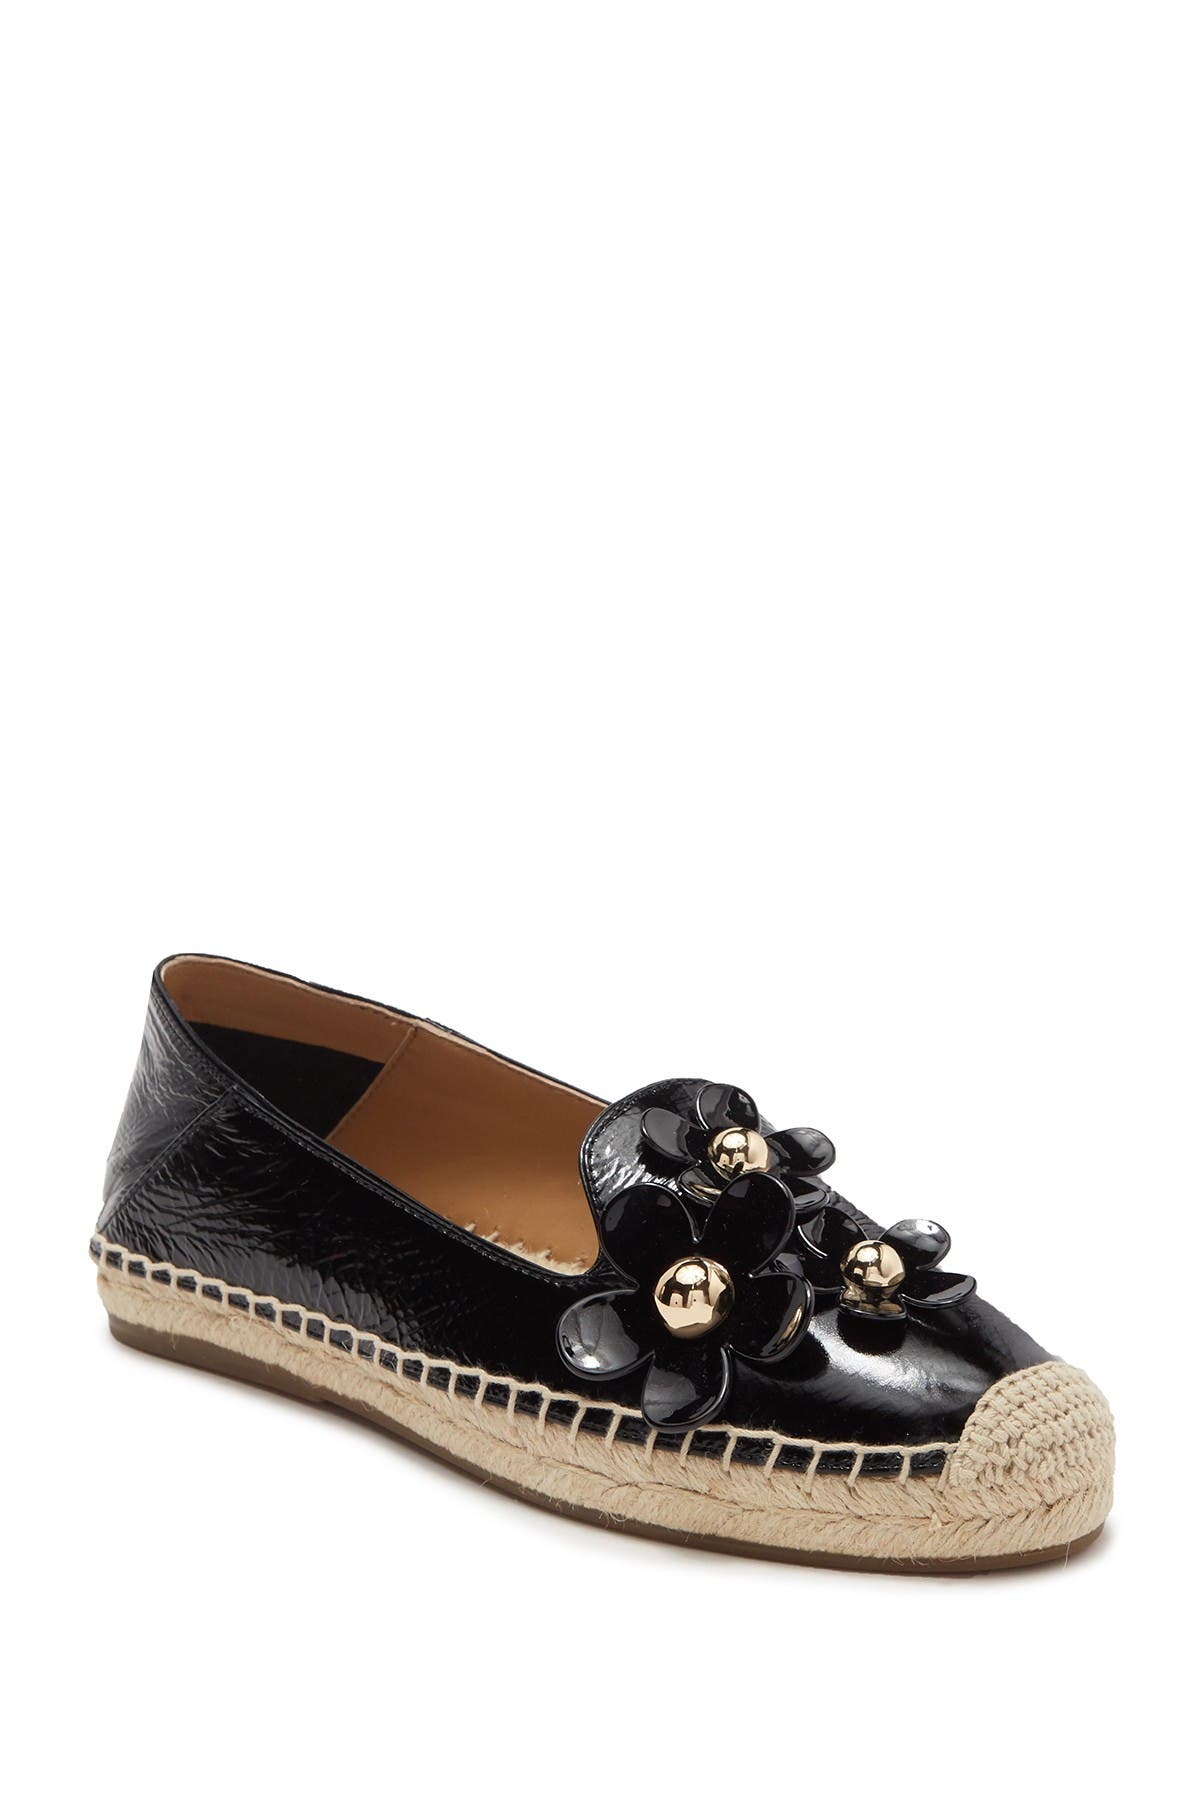 Marc Jacobs Daisy Flat Espadrille In Black